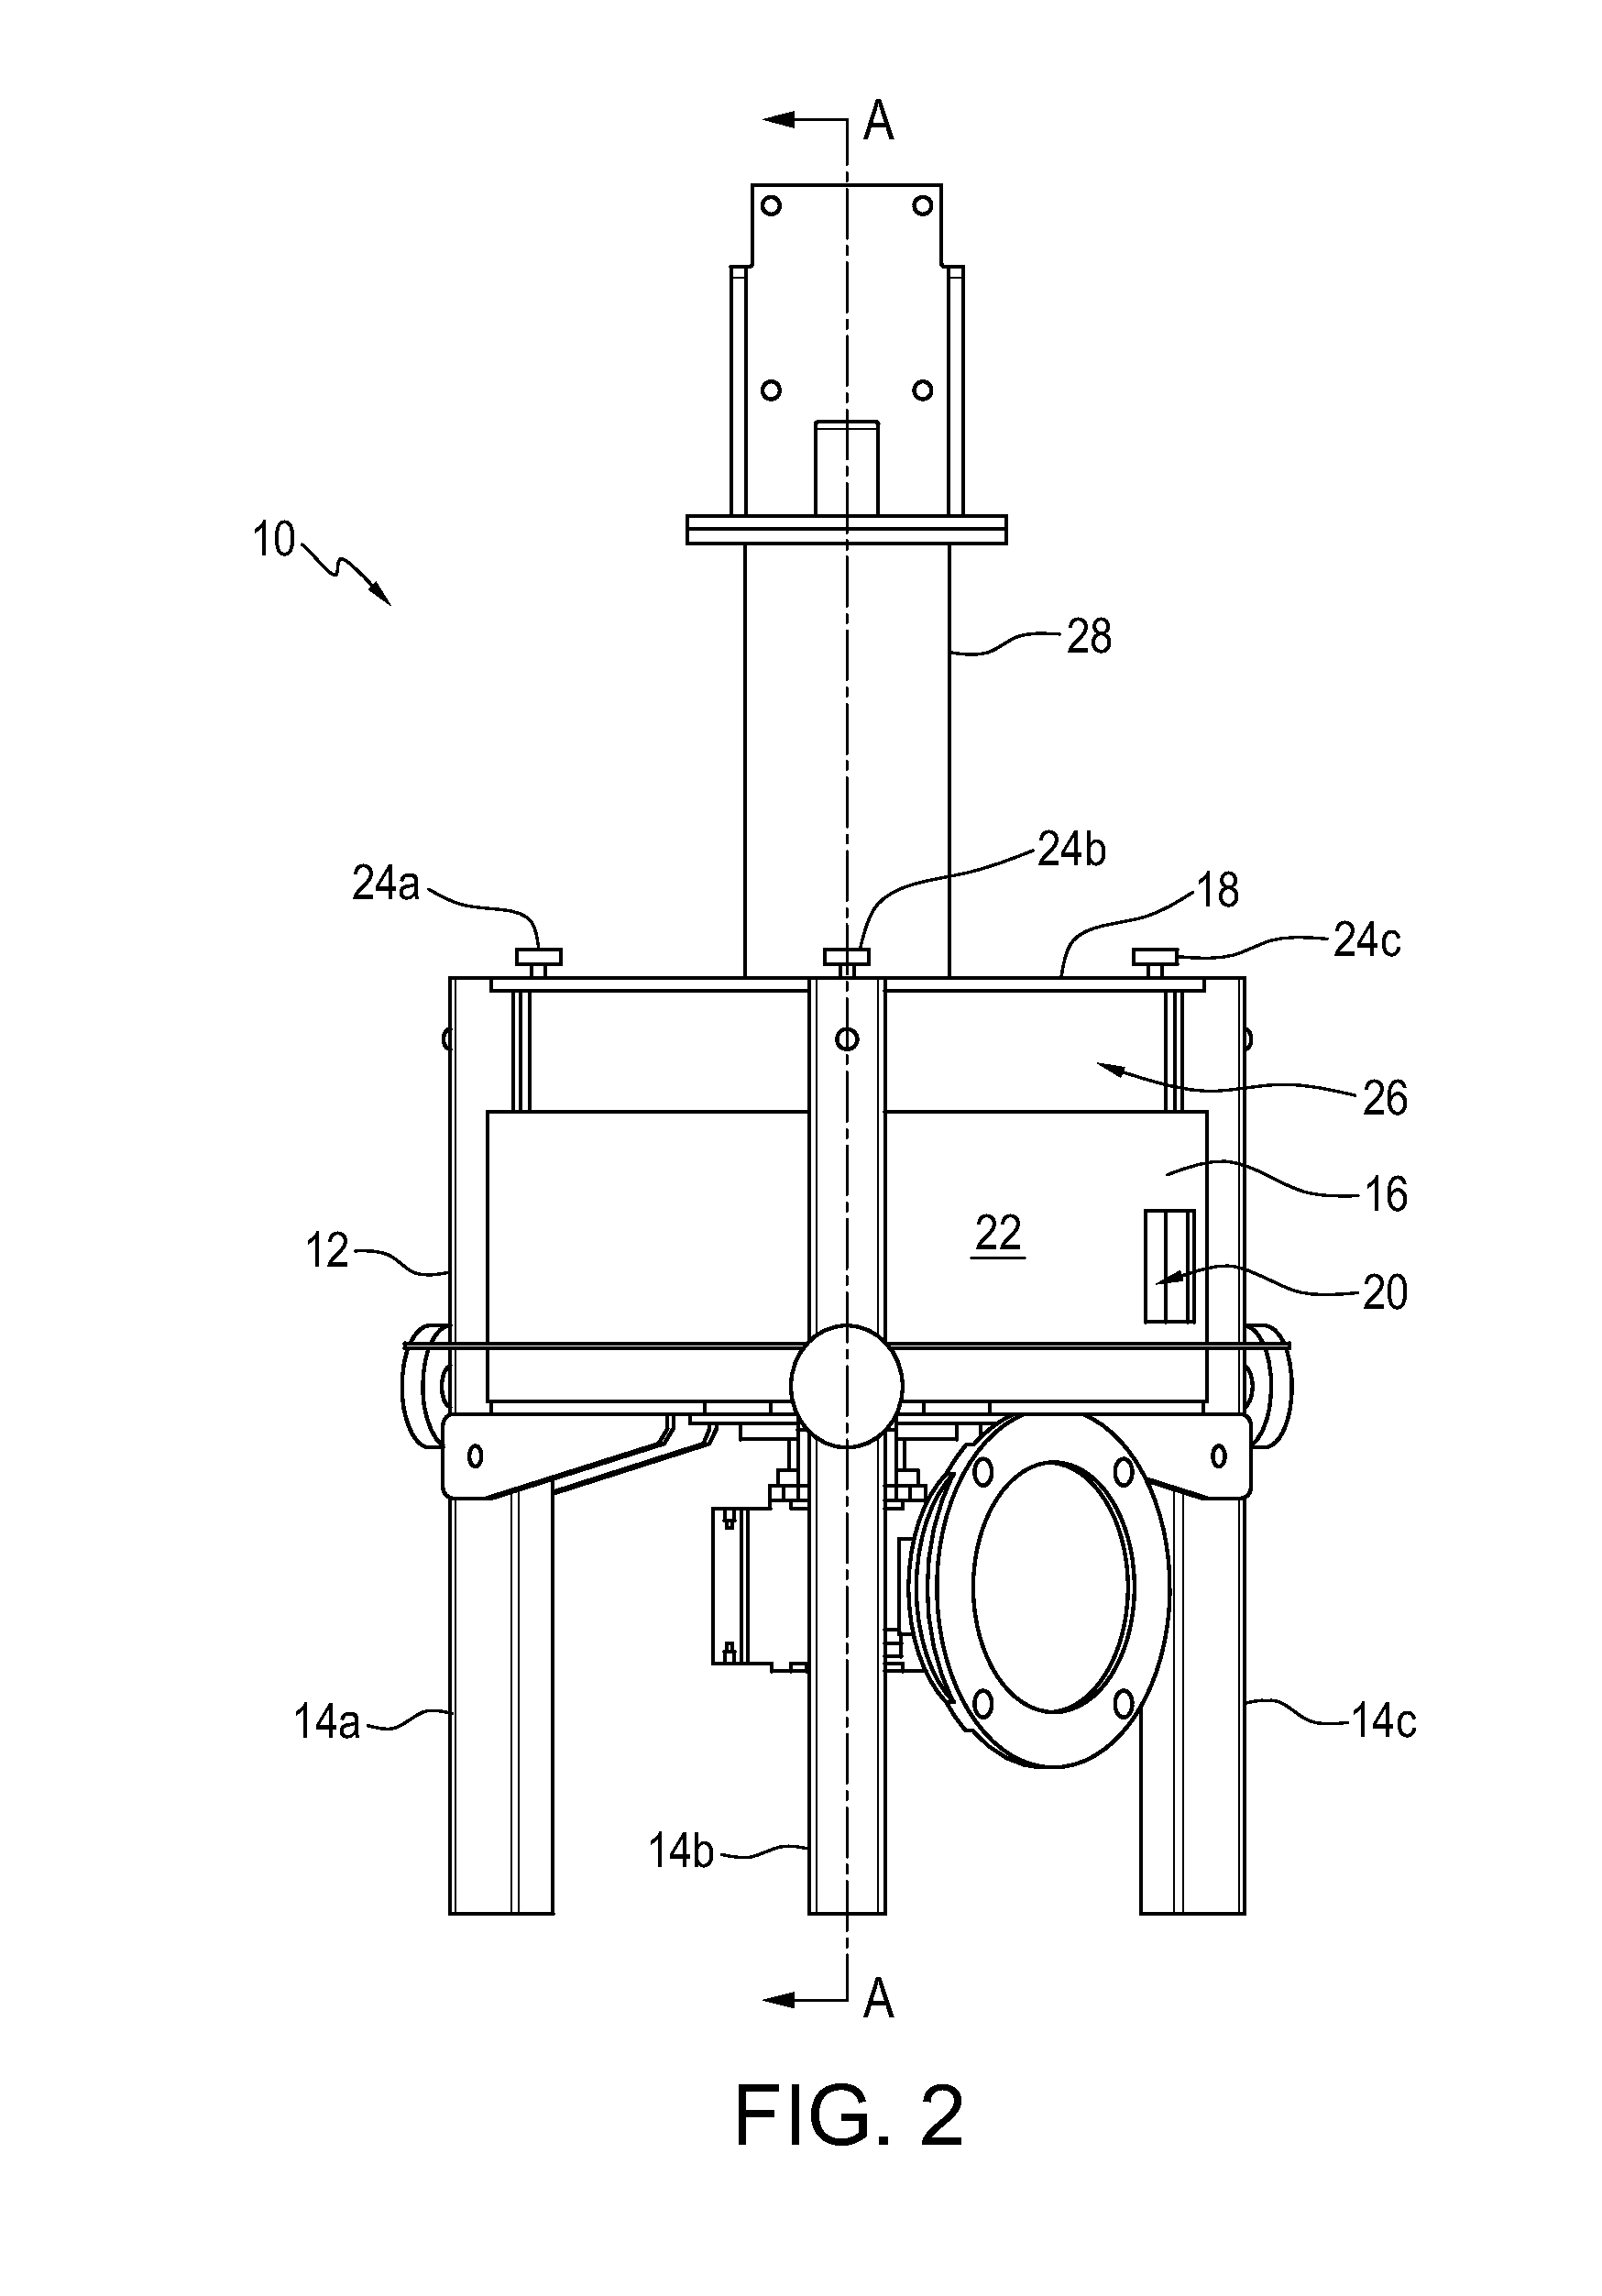 Automatic and continuous rubber extracting device for extracting rubber from a rubber-bearing plant material